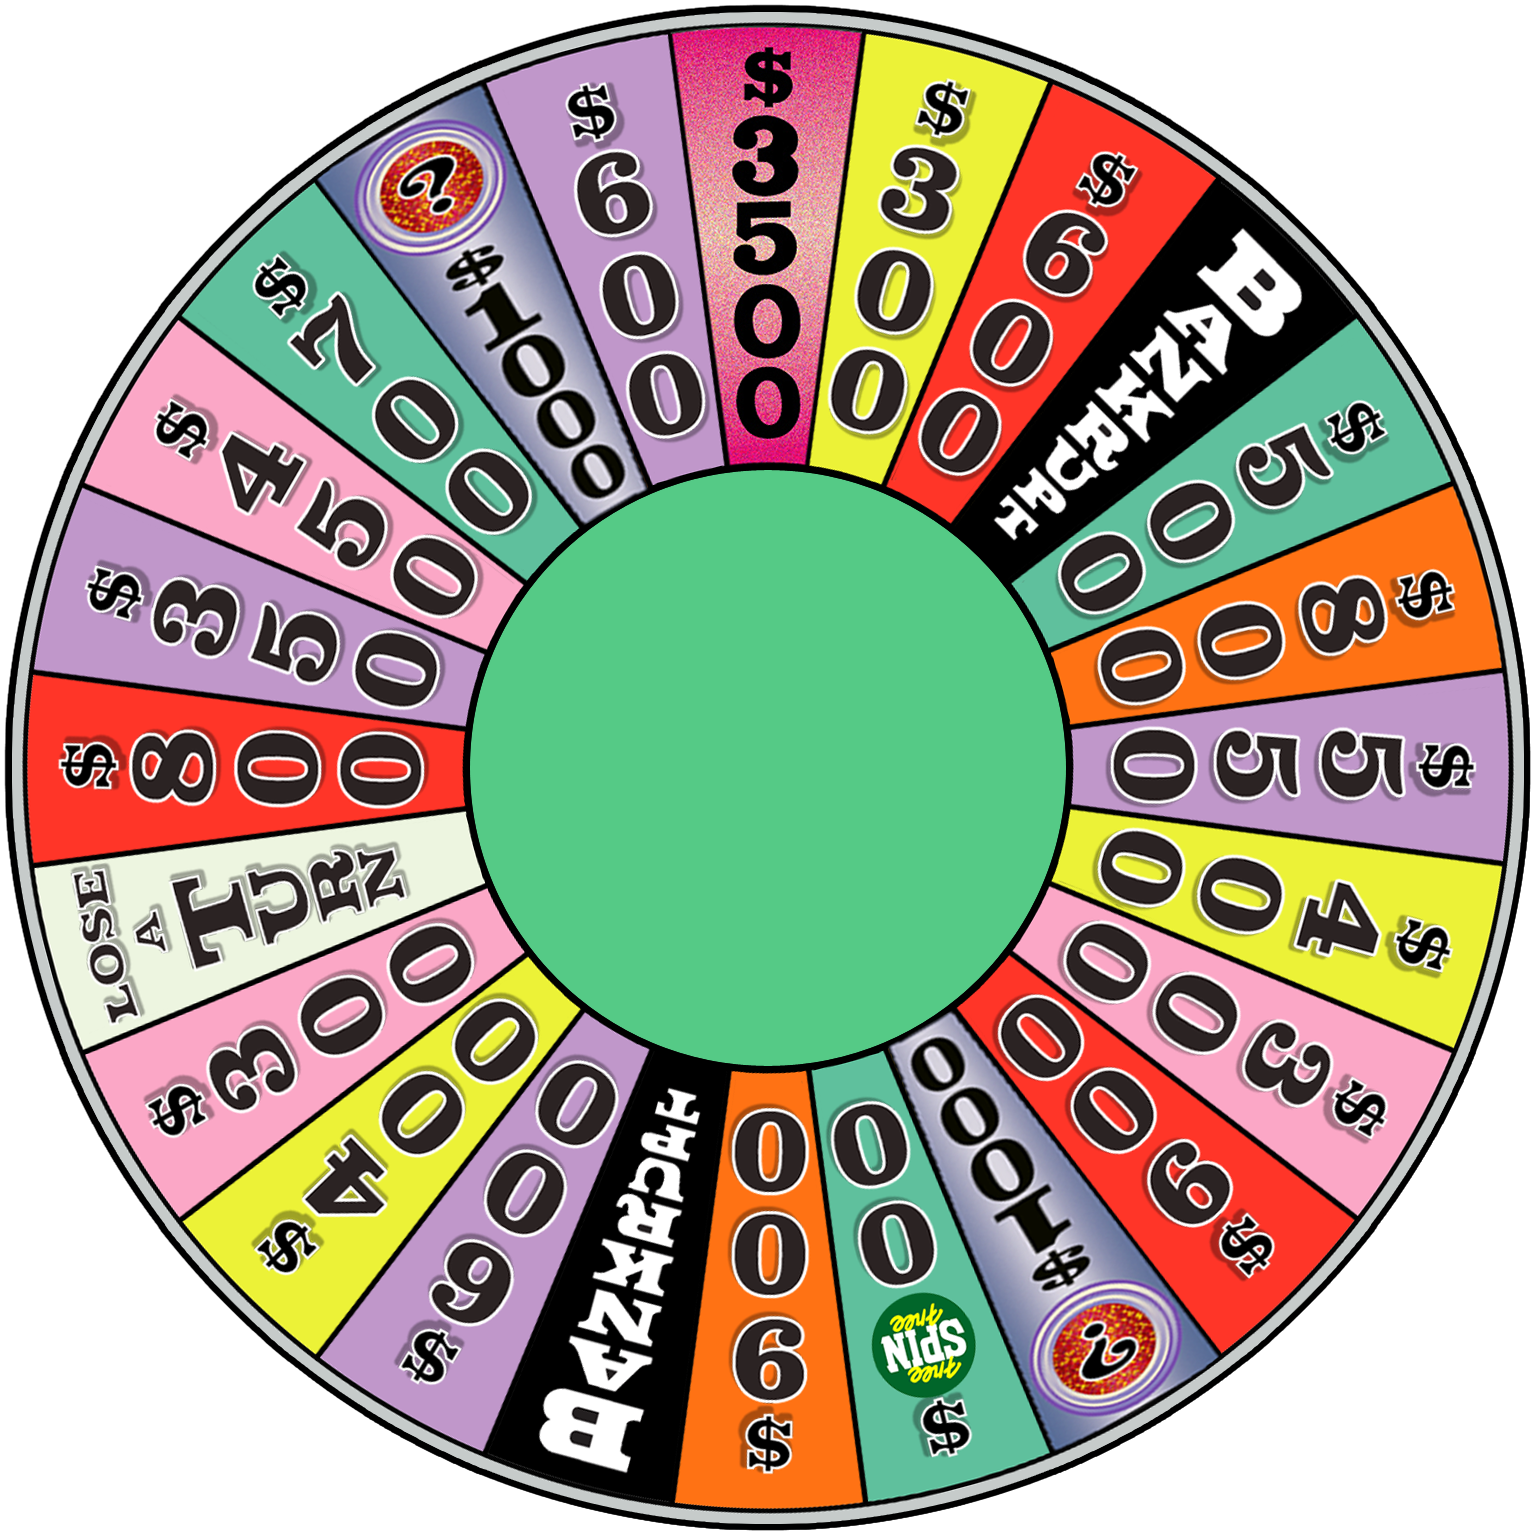 Wheel of Fortune Deluxe 2 PC game - Mystery round by wheelgenius